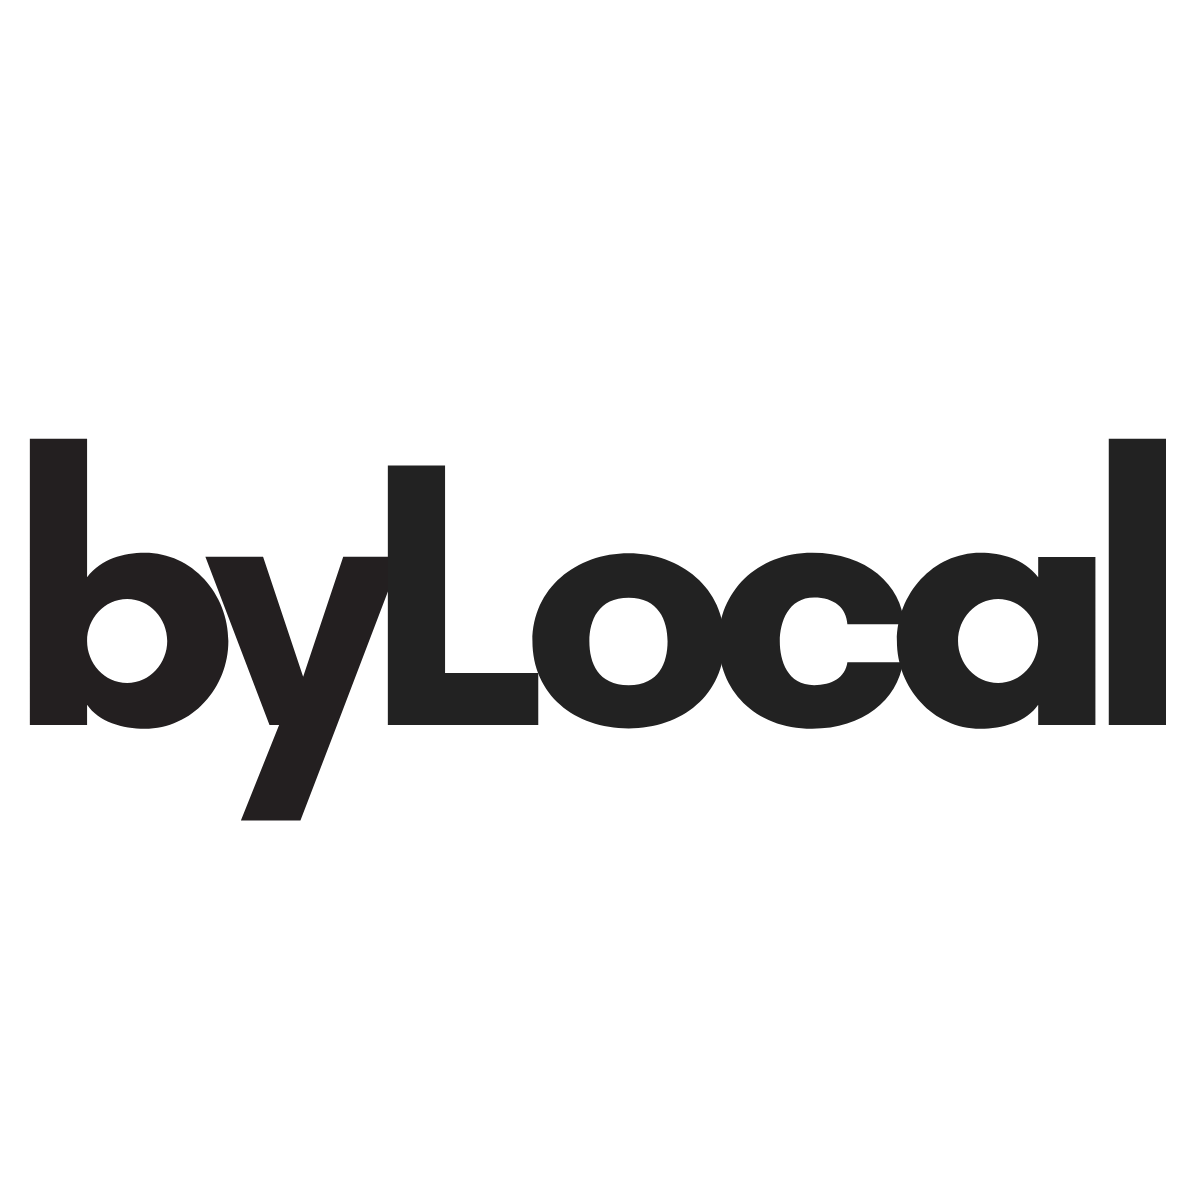 byLocal